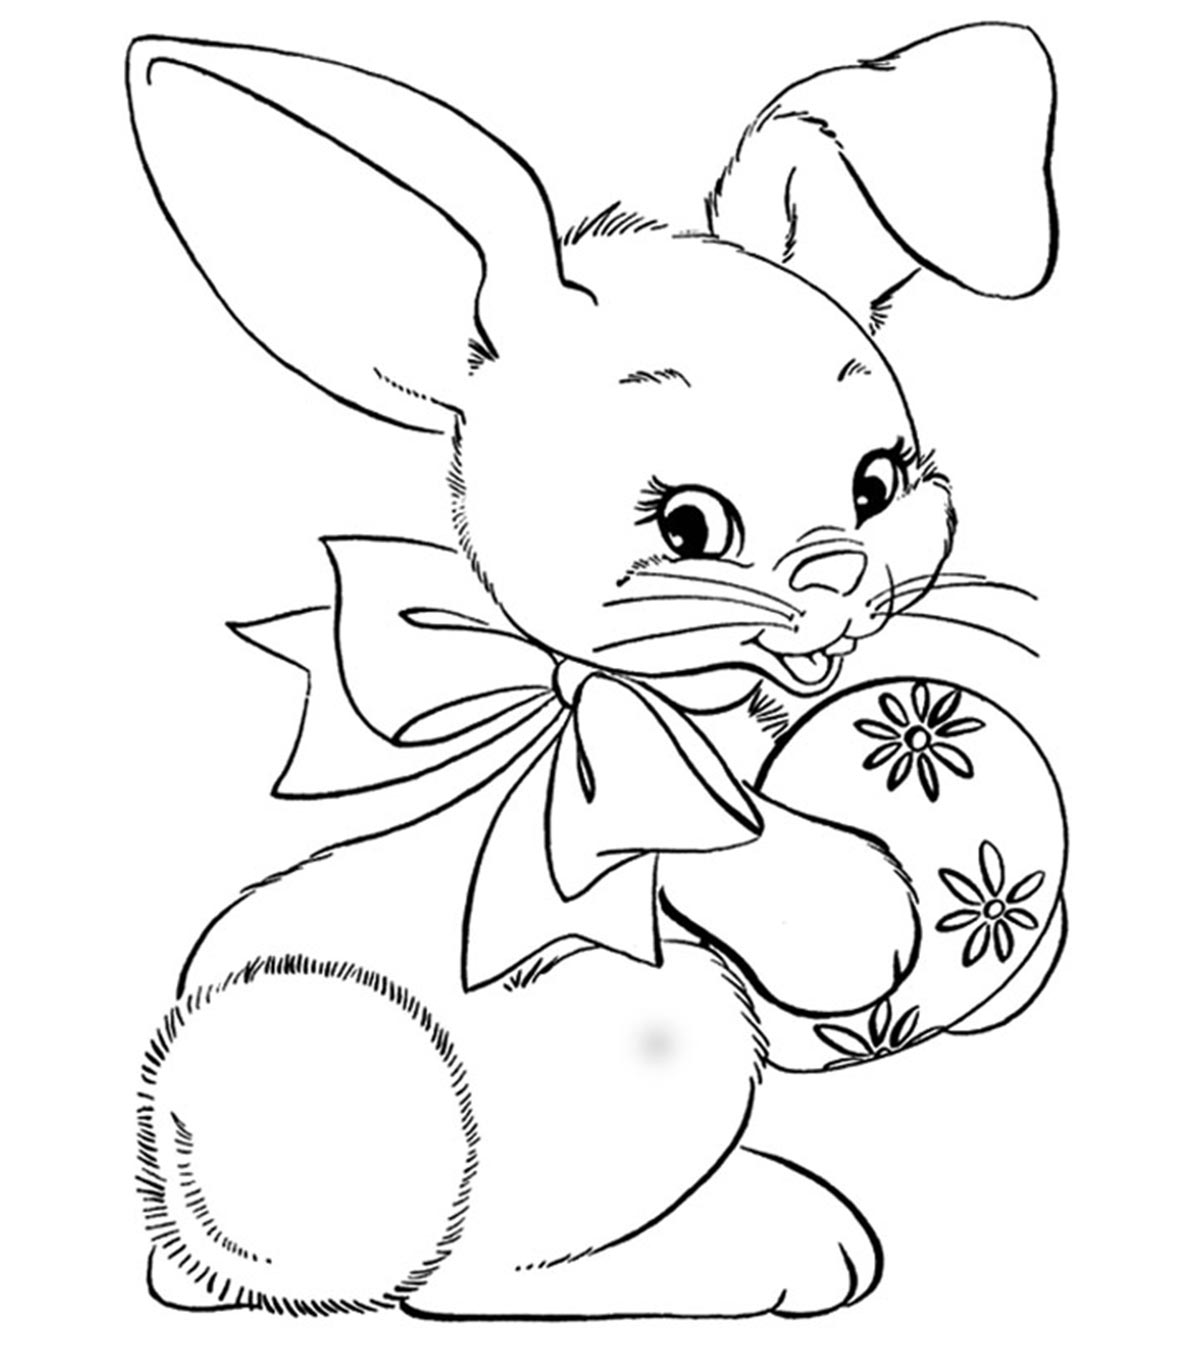 15 Best Easter Bunny Coloring Pages Your Toddler Will Love To Color